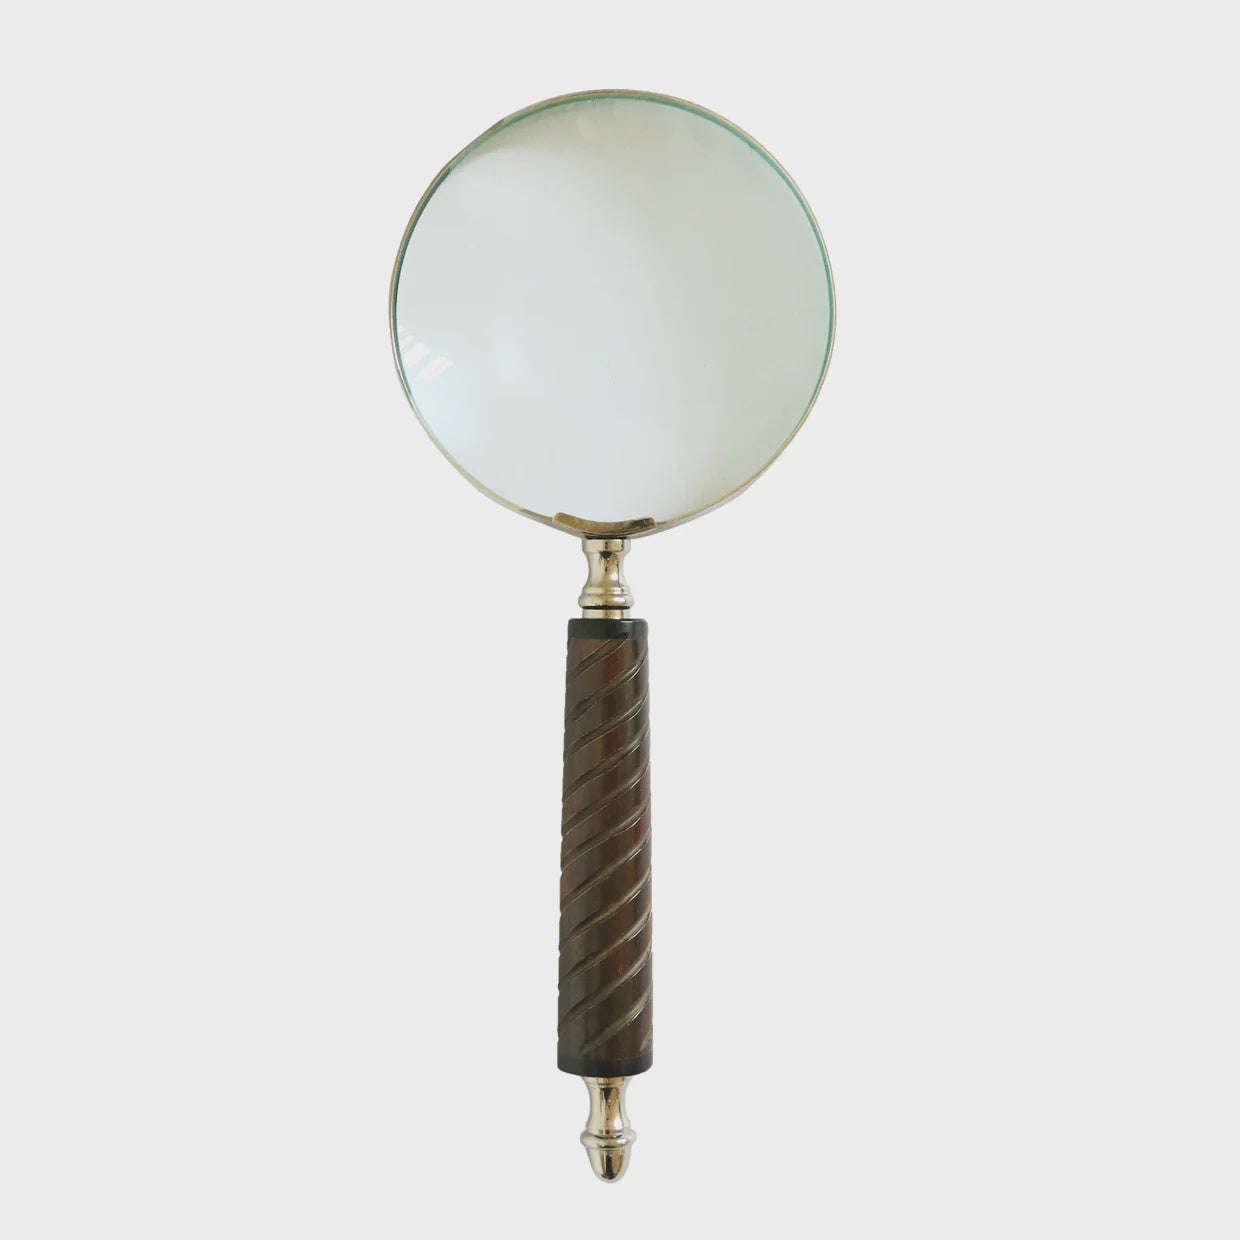 Magnifying glass - Twisted bone handle